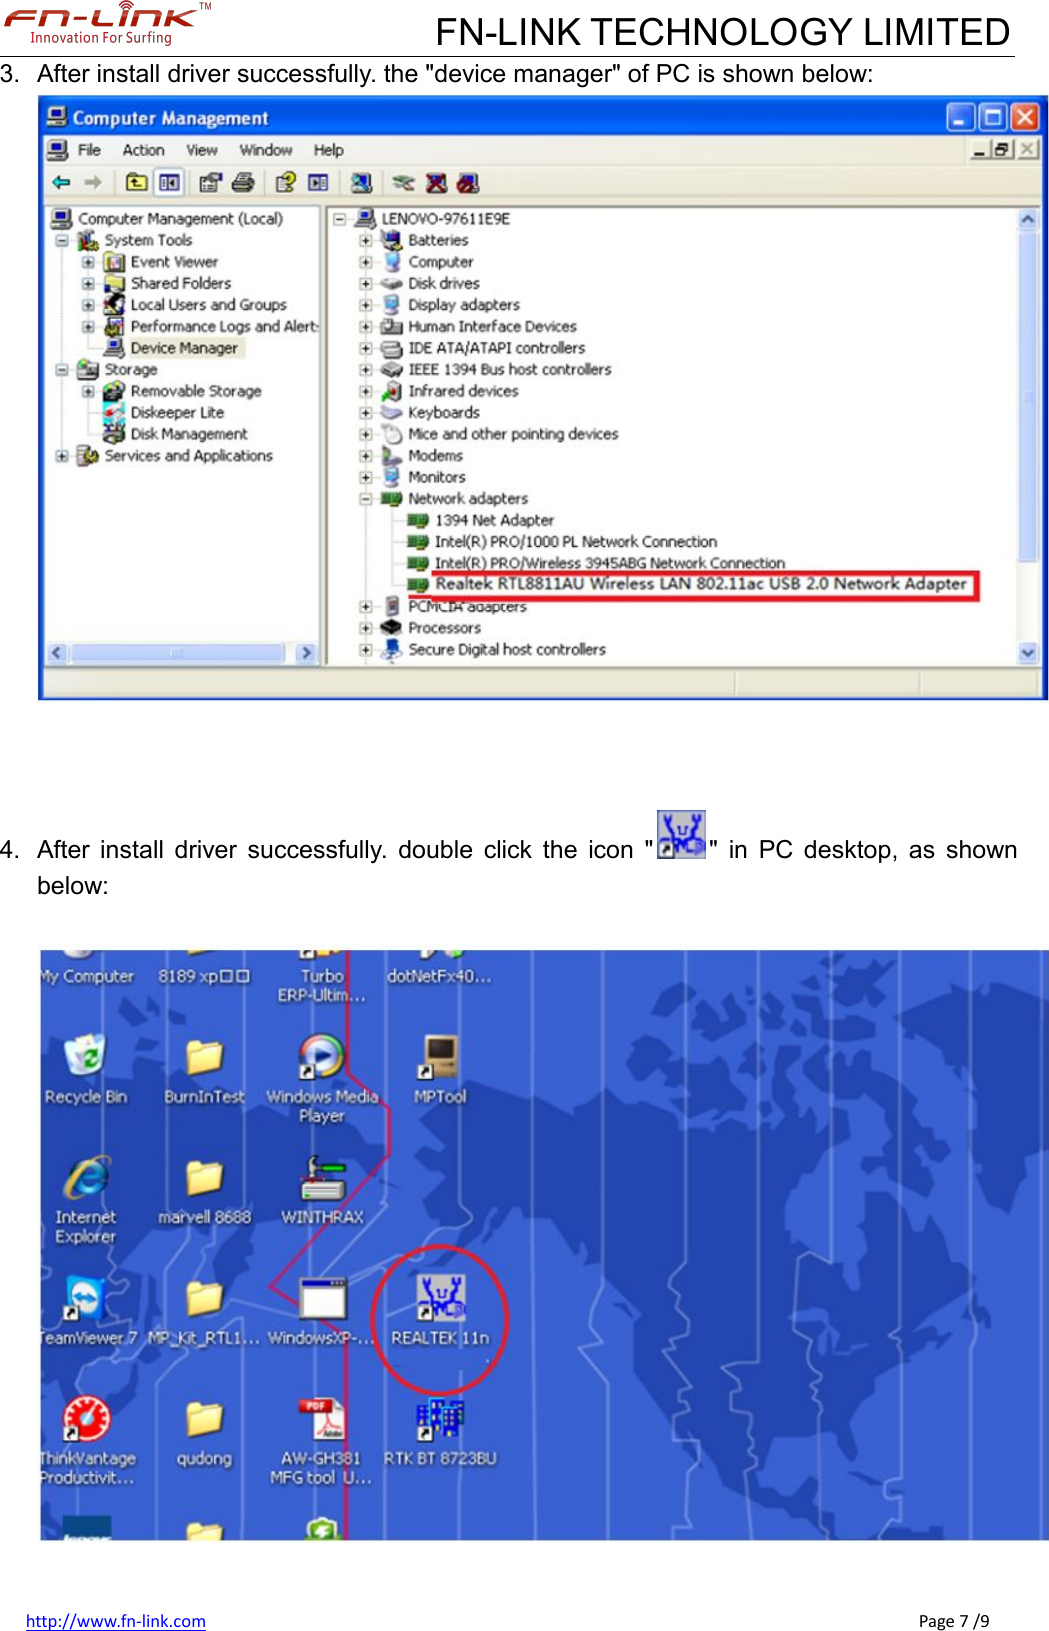 FN-LINK TECHNOLOGY LIMITEDhttp://www.fn-link.com Page 7 /93. After install driver successfully. the &quot;device manager&quot; of PC is shown below:4. After install driver successfully. double click the icon &quot; &quot; in PC desktop, as shownbelow: